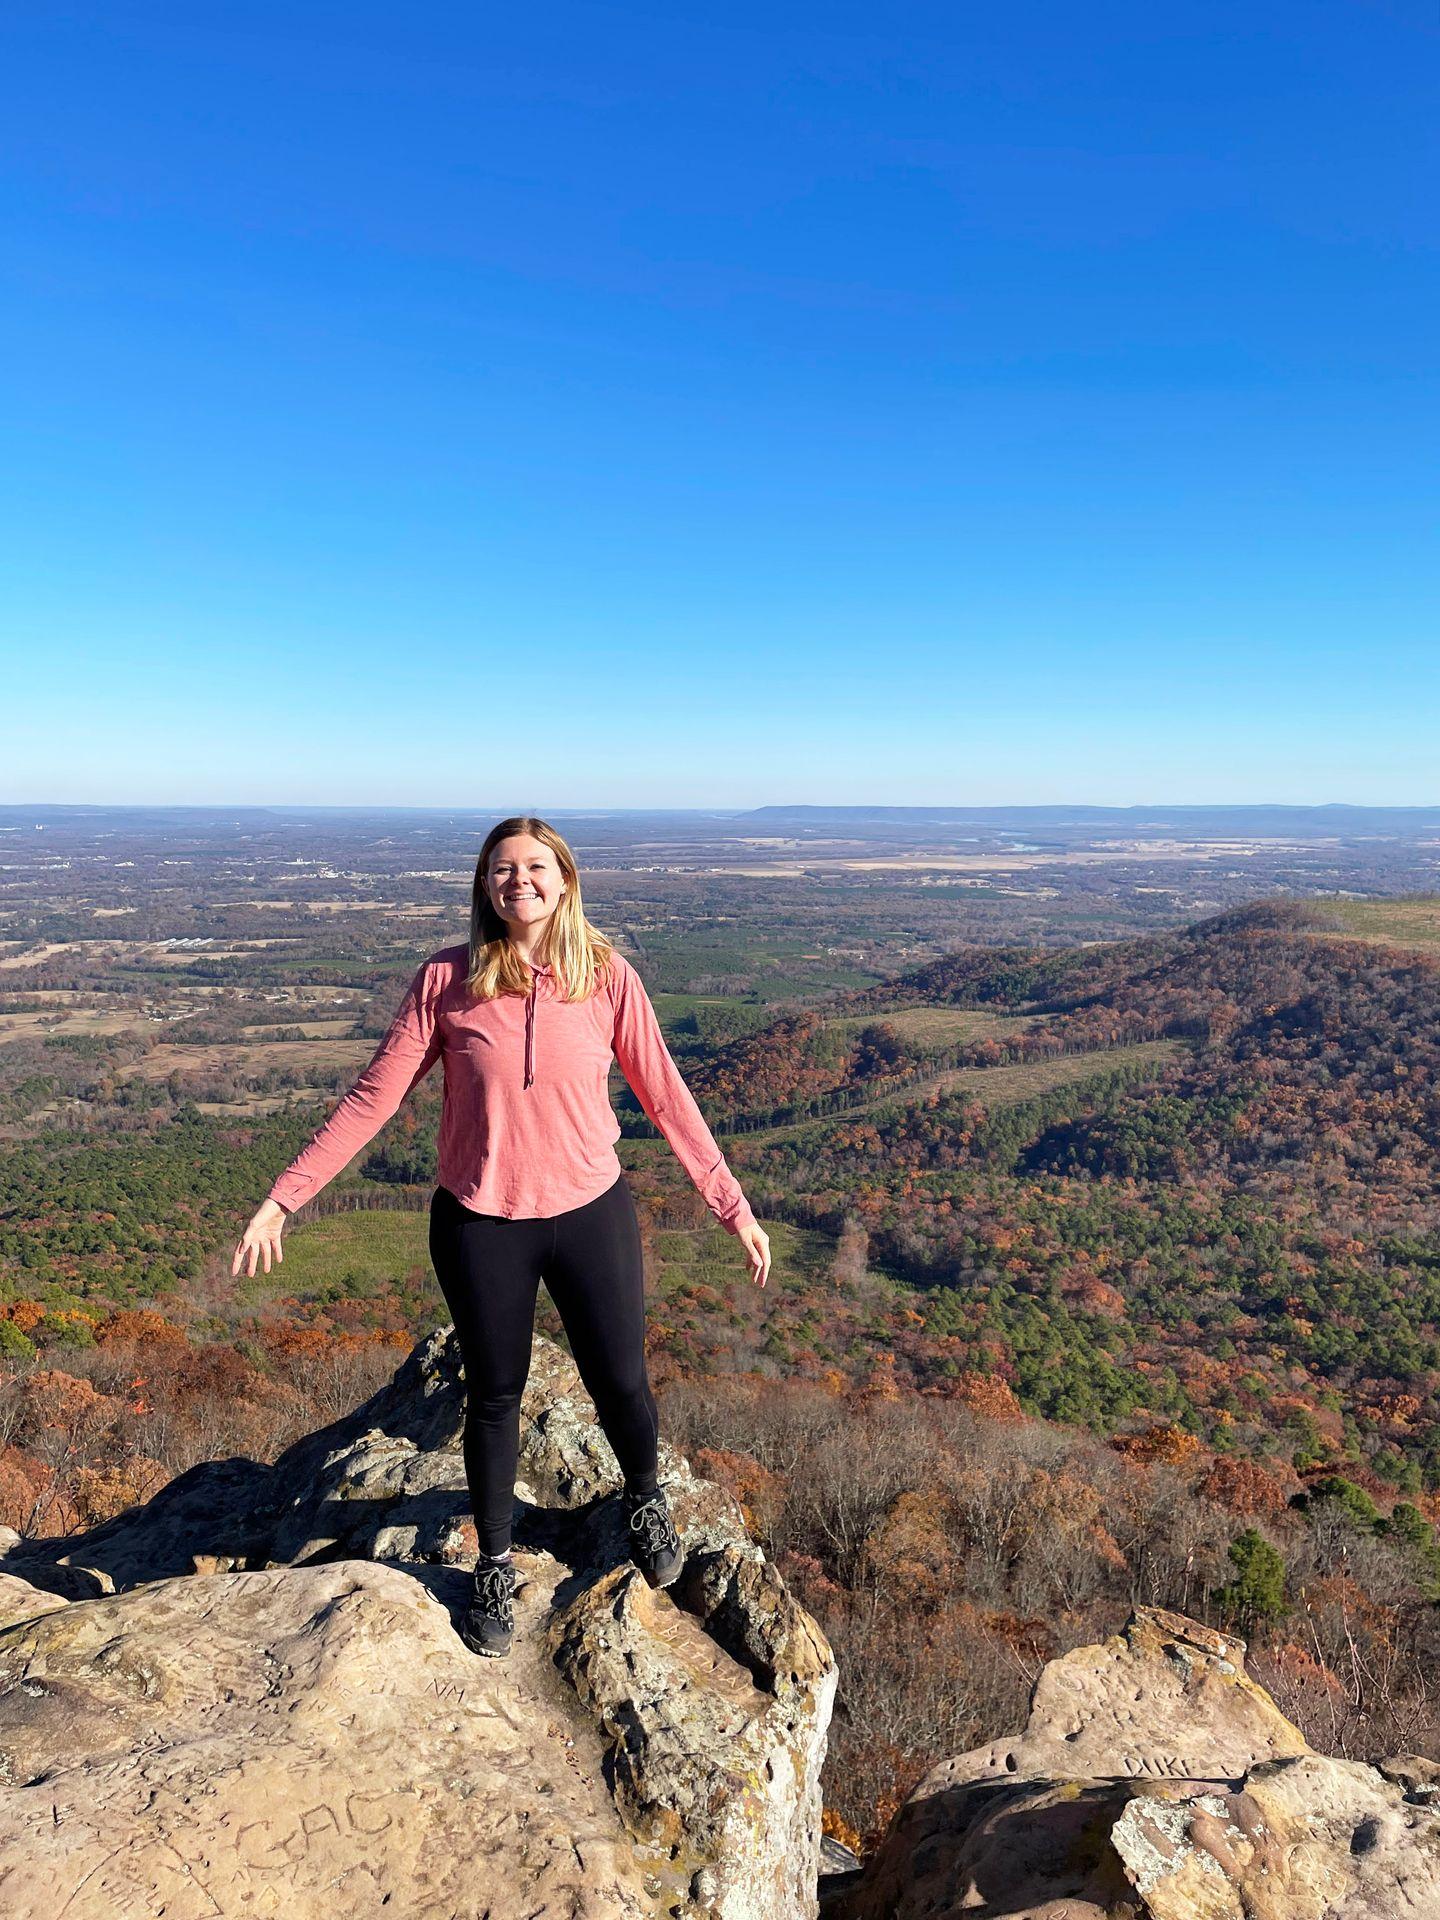 A close view of Lydia standing on a rock with great views from Mount Nebo behind her.